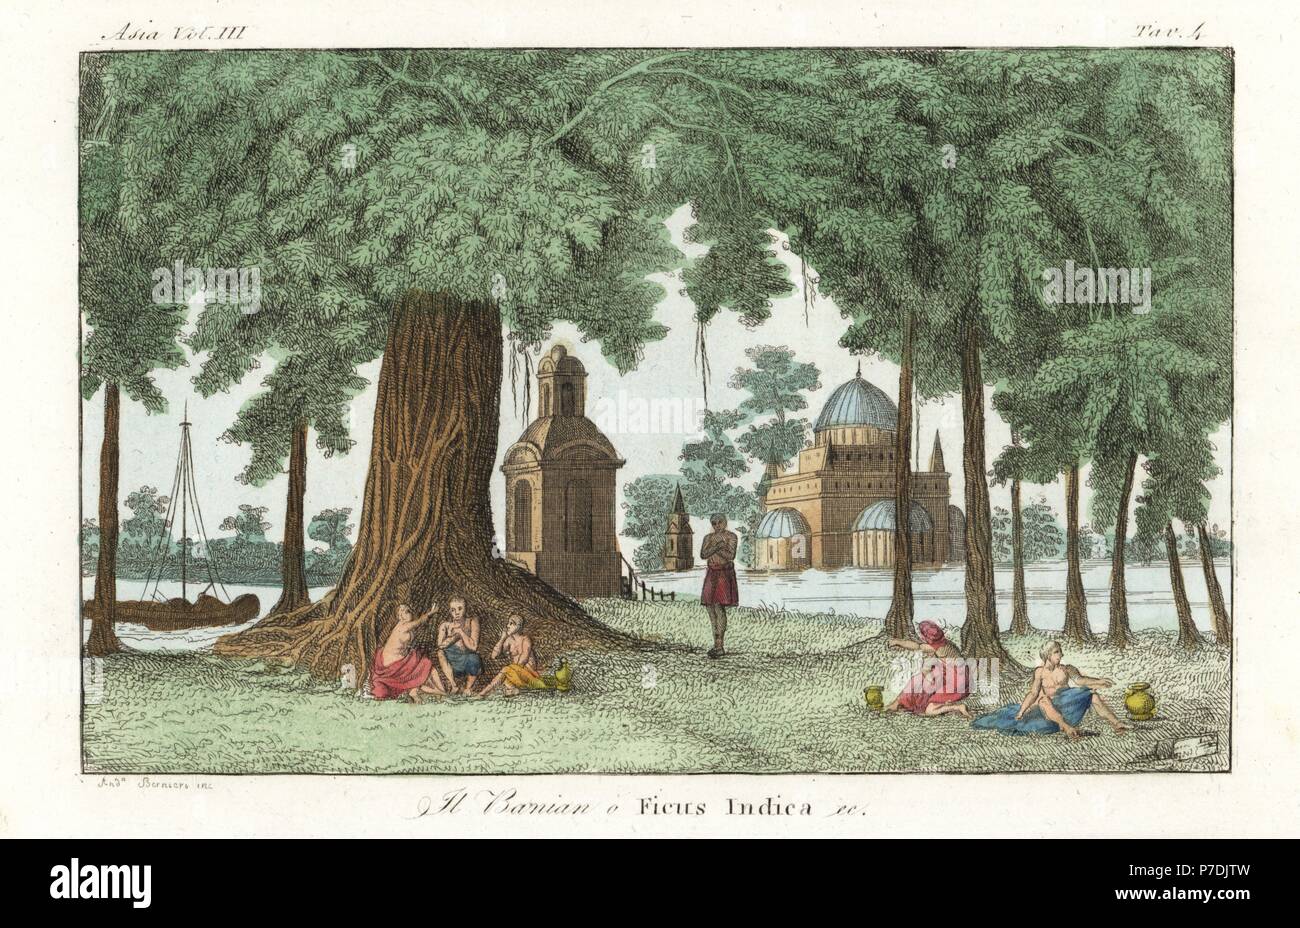 Indian men and women under an Indian banyan tree, Ficus benghalensis, with temple in the background, 1800s. Handcoloured copperplate engraving by Andrea Bernieri from Giulio Ferrario's Costumes Ancient and Modern of the Peoples of the World, Batelli, Florence, 1843. Stock Photo